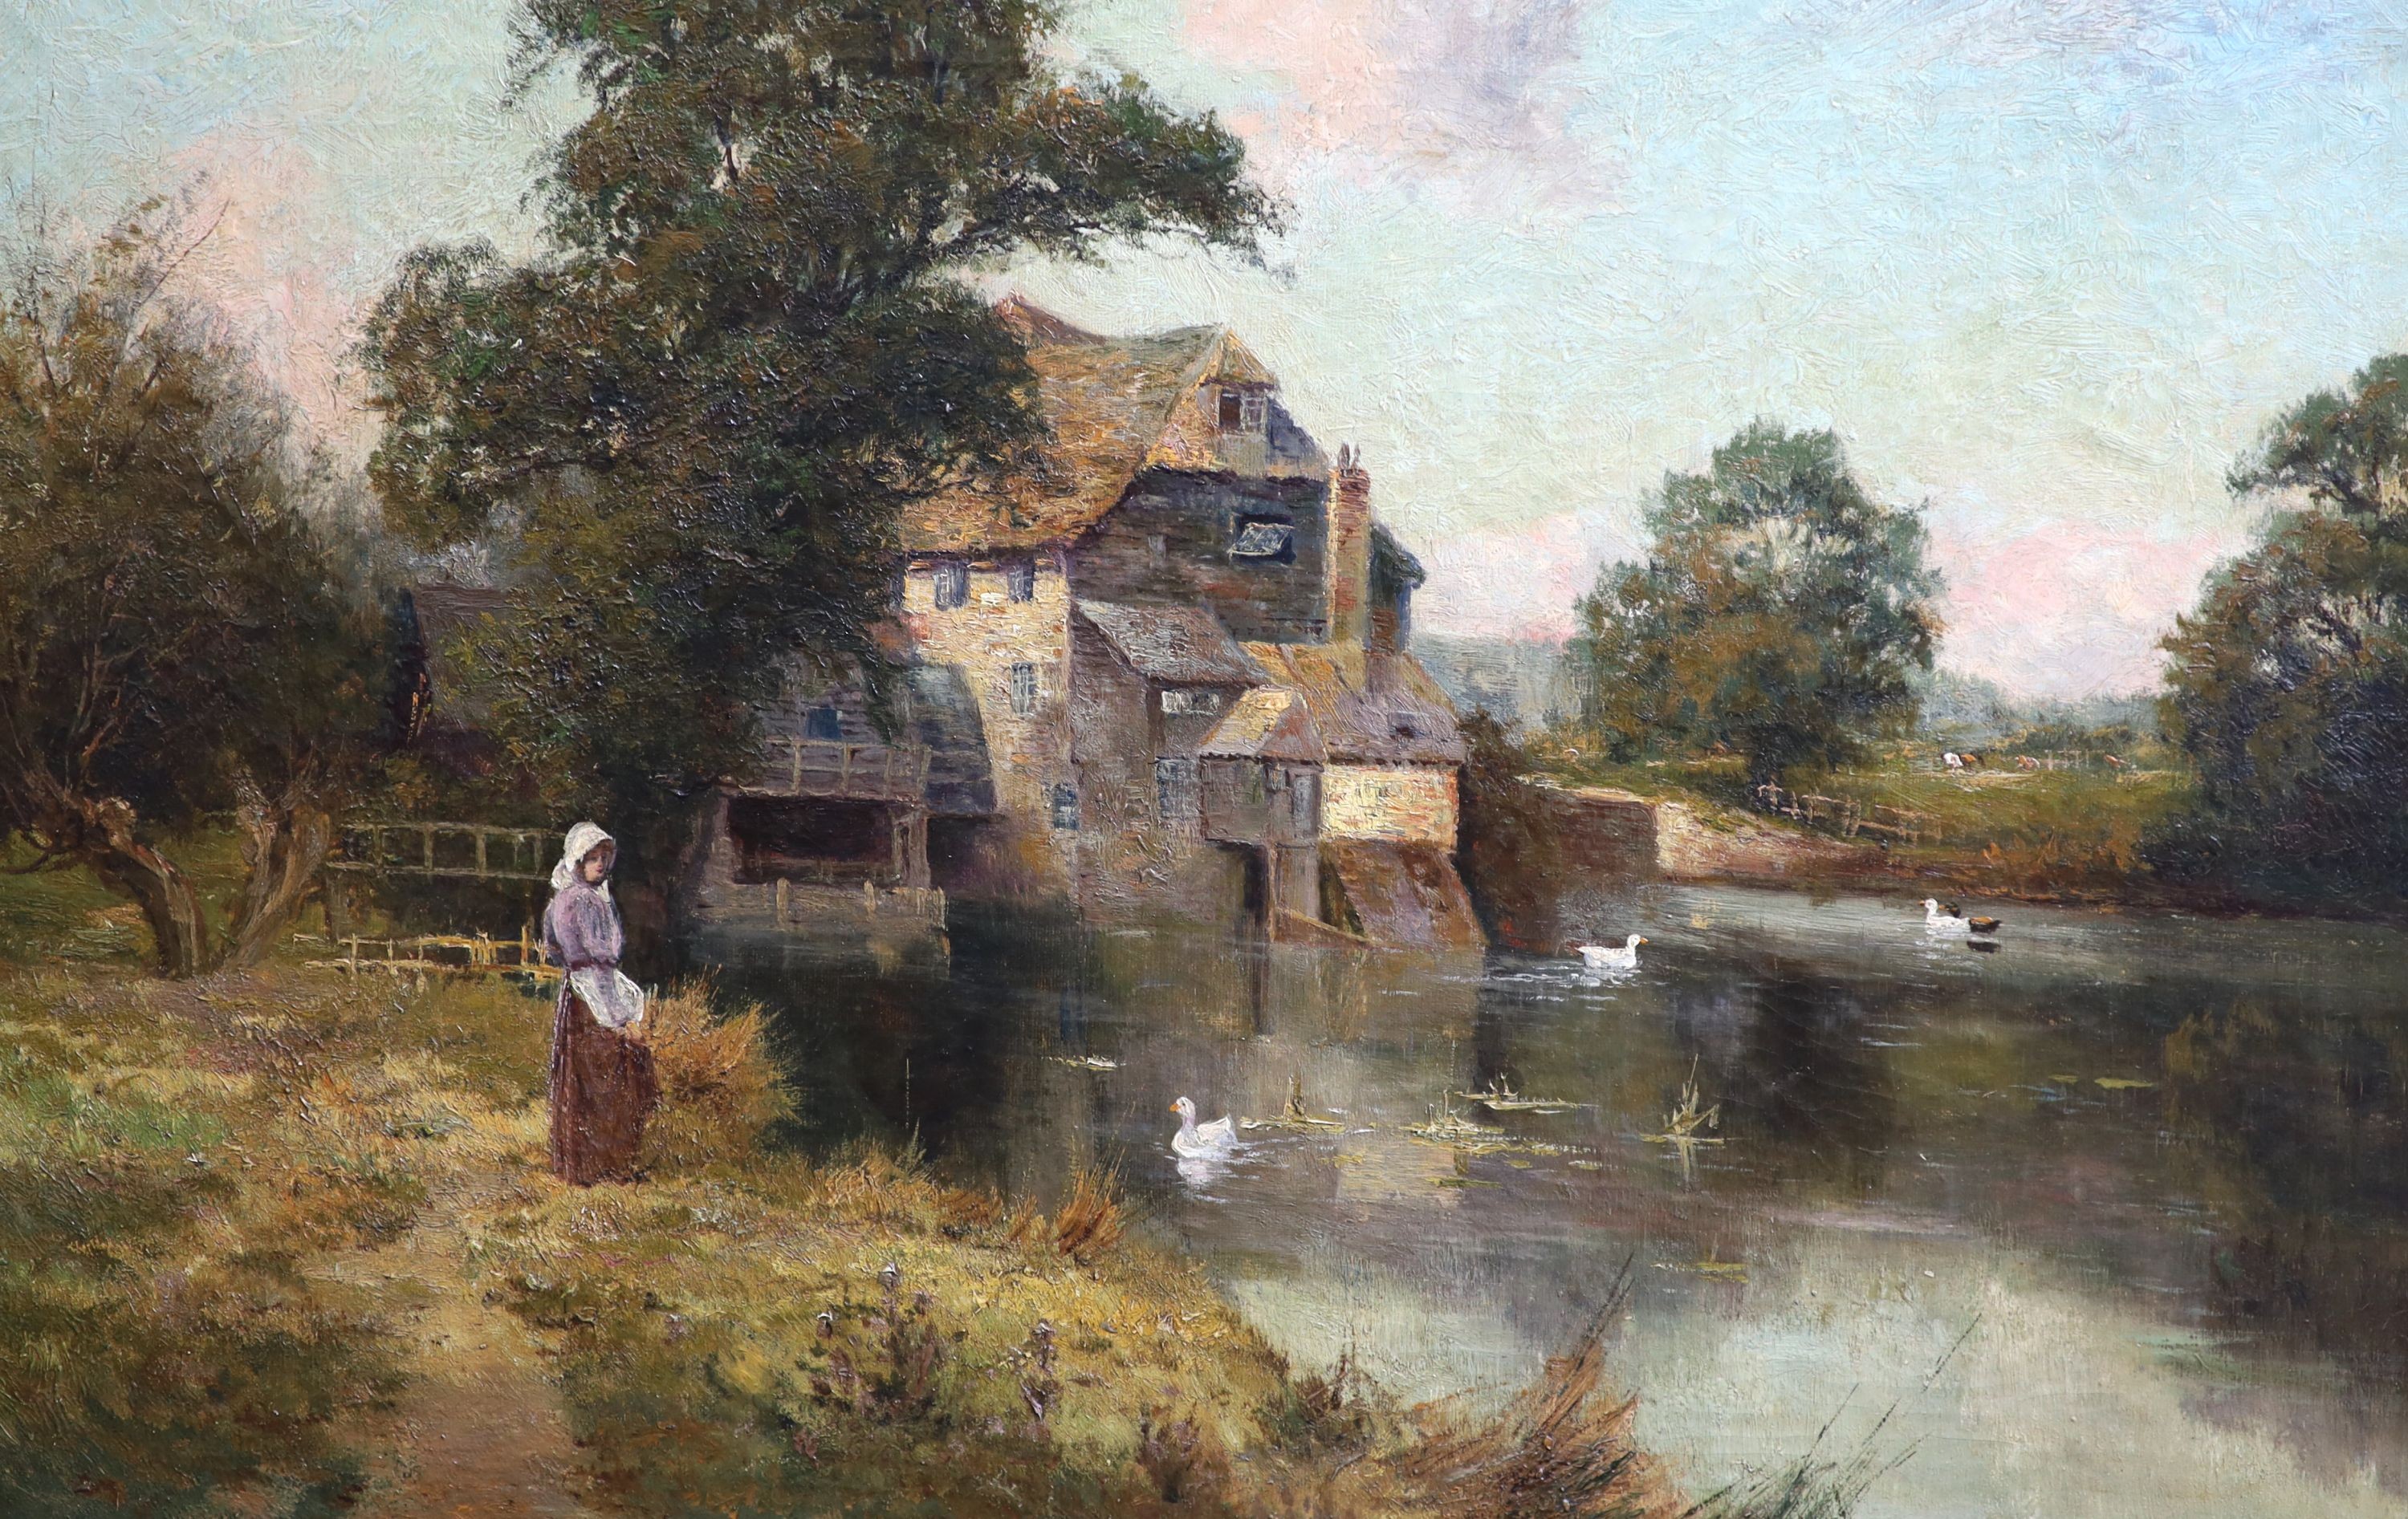 Ernest Charles Walbourn (1872-1927), The Old Mill, Oil on canvas, 40 x 60cm.